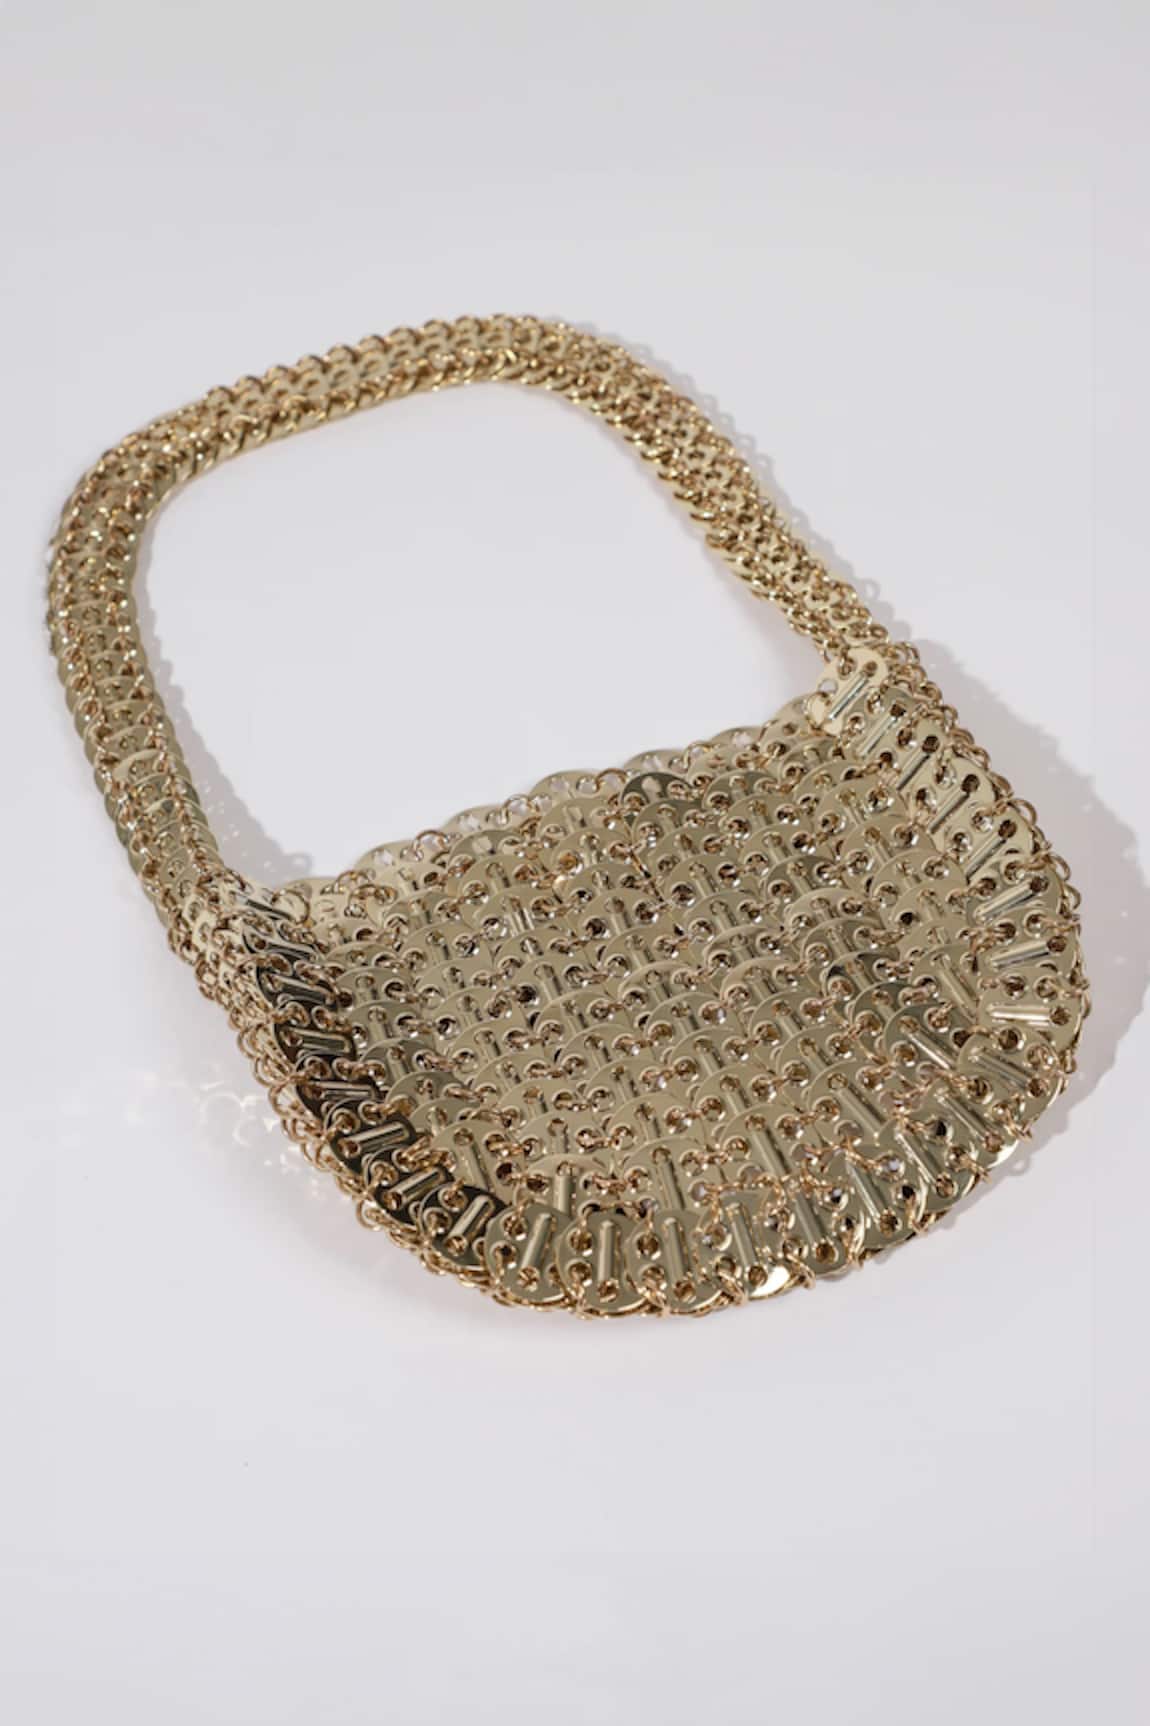 Oceana Clutches 1969 Moon Chainmail Embellished Bag